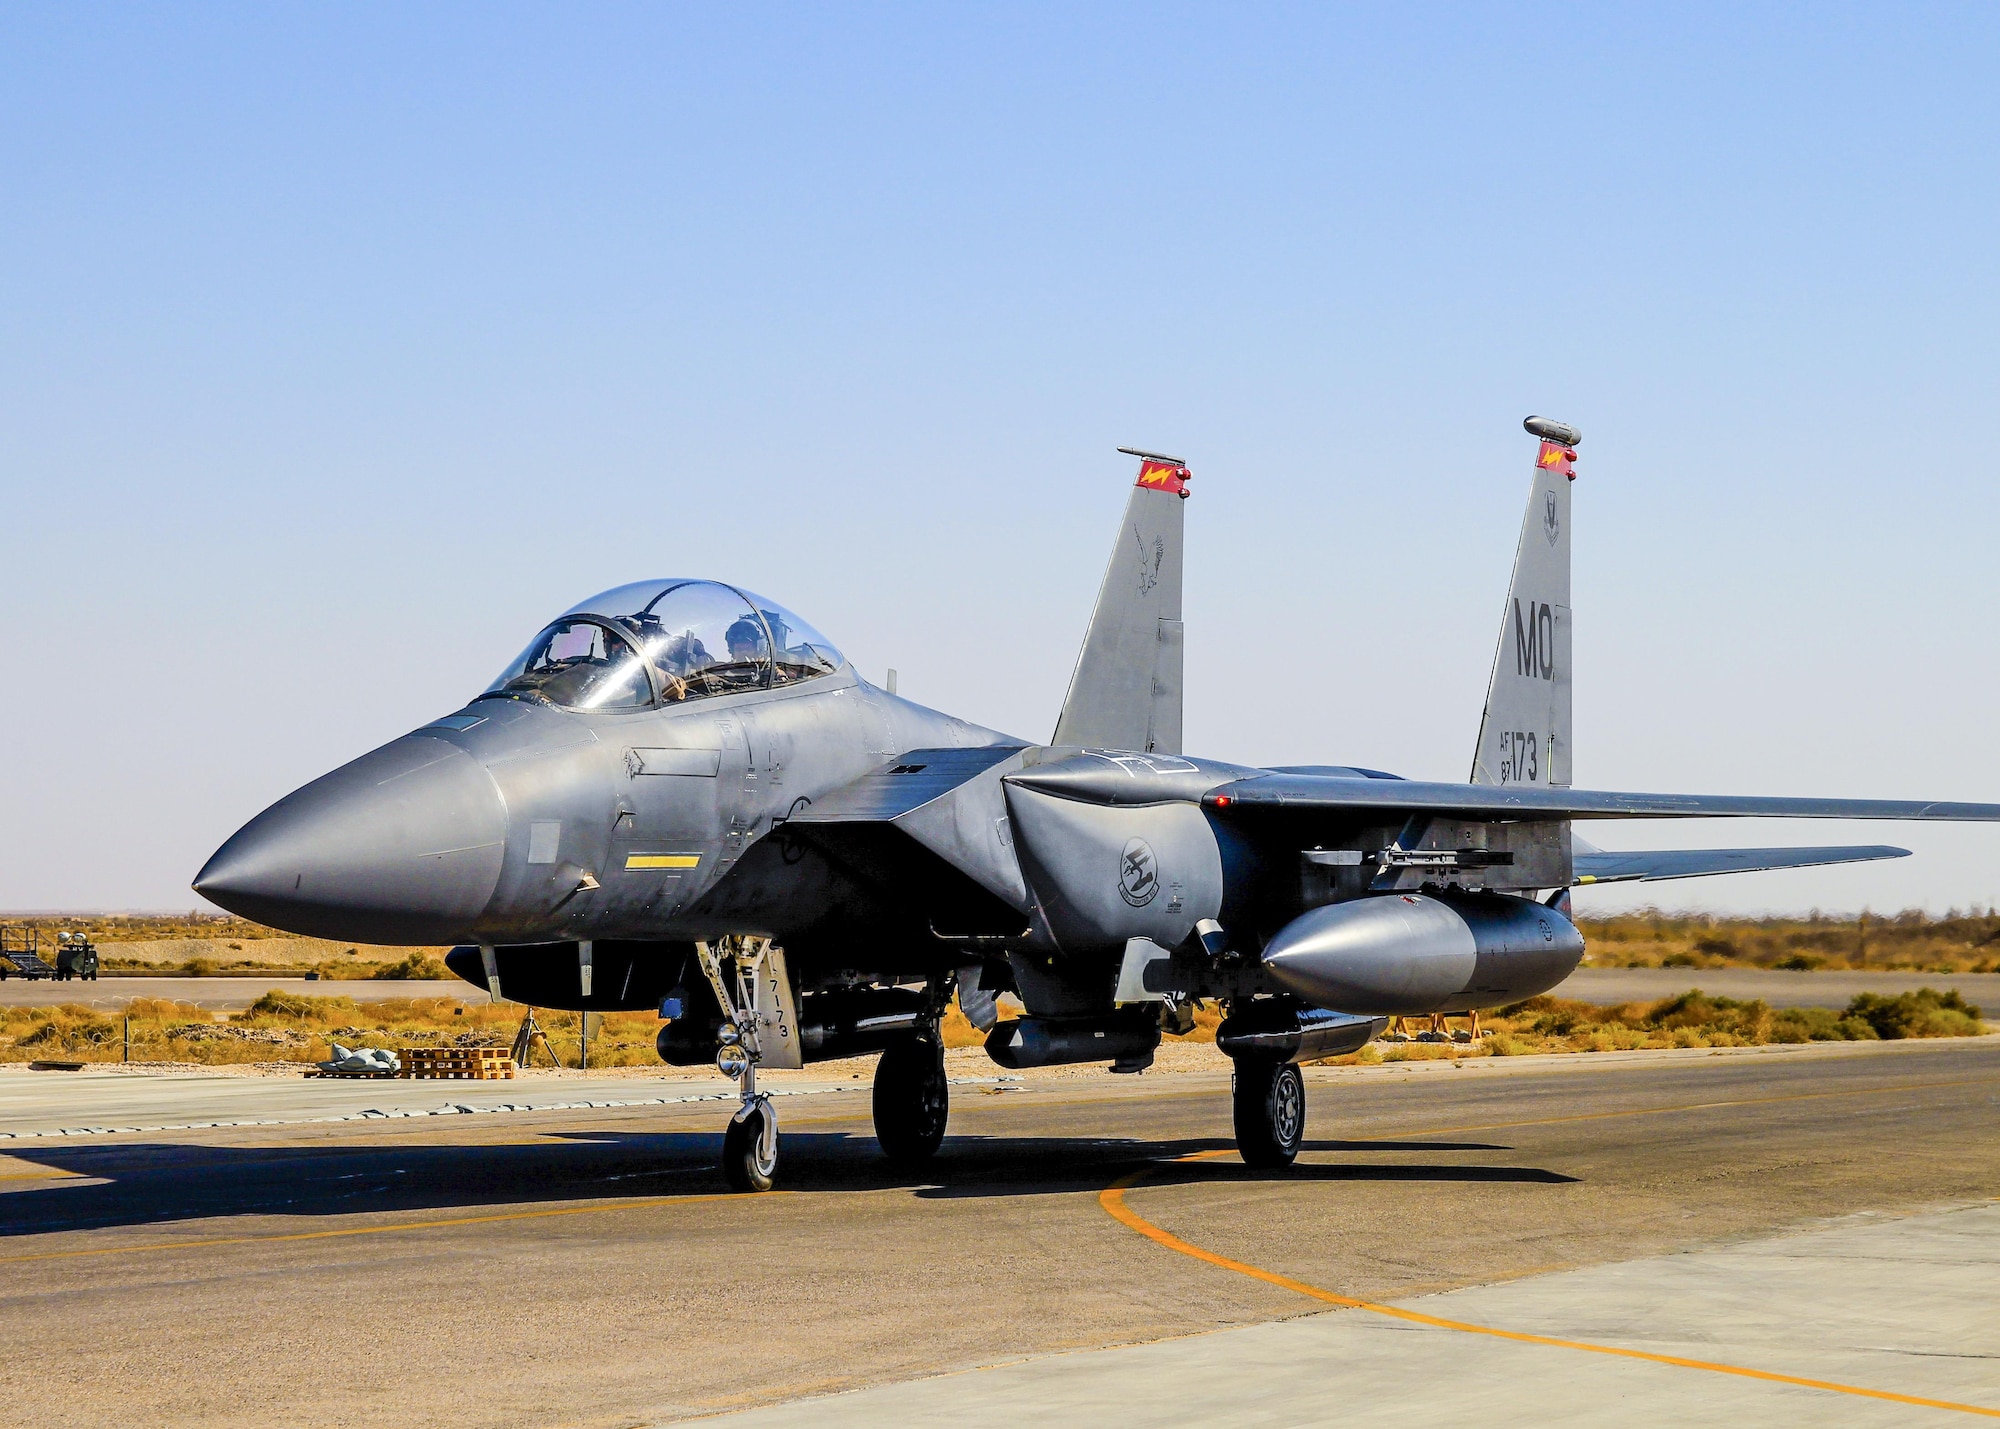 An F-15E Strike Eagle, assigned to the 366th Fighter Wing, taxis on a runway at an undisclosed location in Southwest Asia, October 5th, 2016. Previous models of the F-15 are assigned air-to-air roles; the "E" model has the capability to fight its way to a target over long ranges, destroy enemy ground positions and fight its way out. (Courtesy Photo)